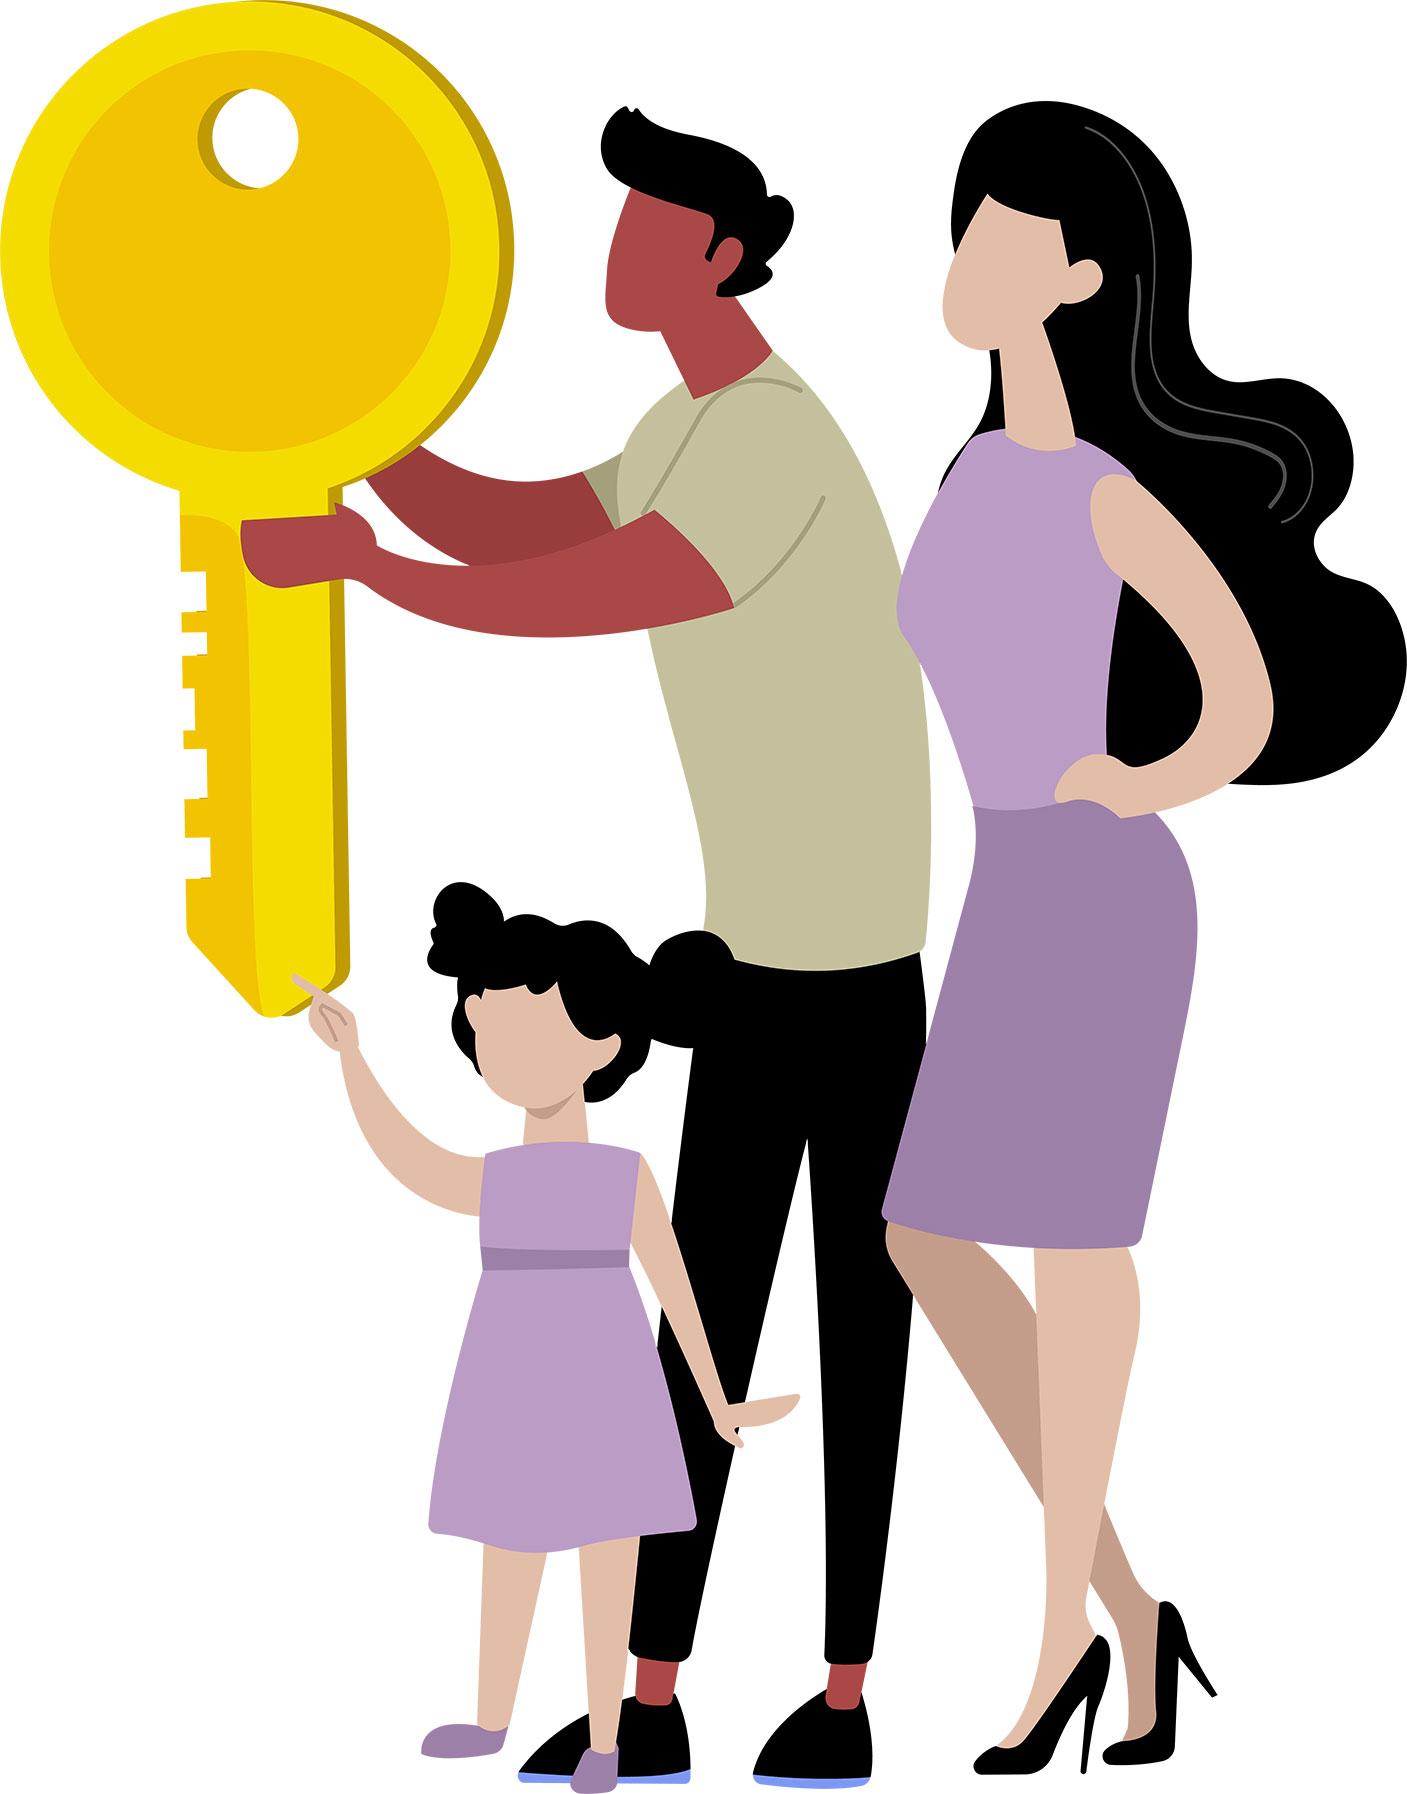 Man, woman and child holding a key